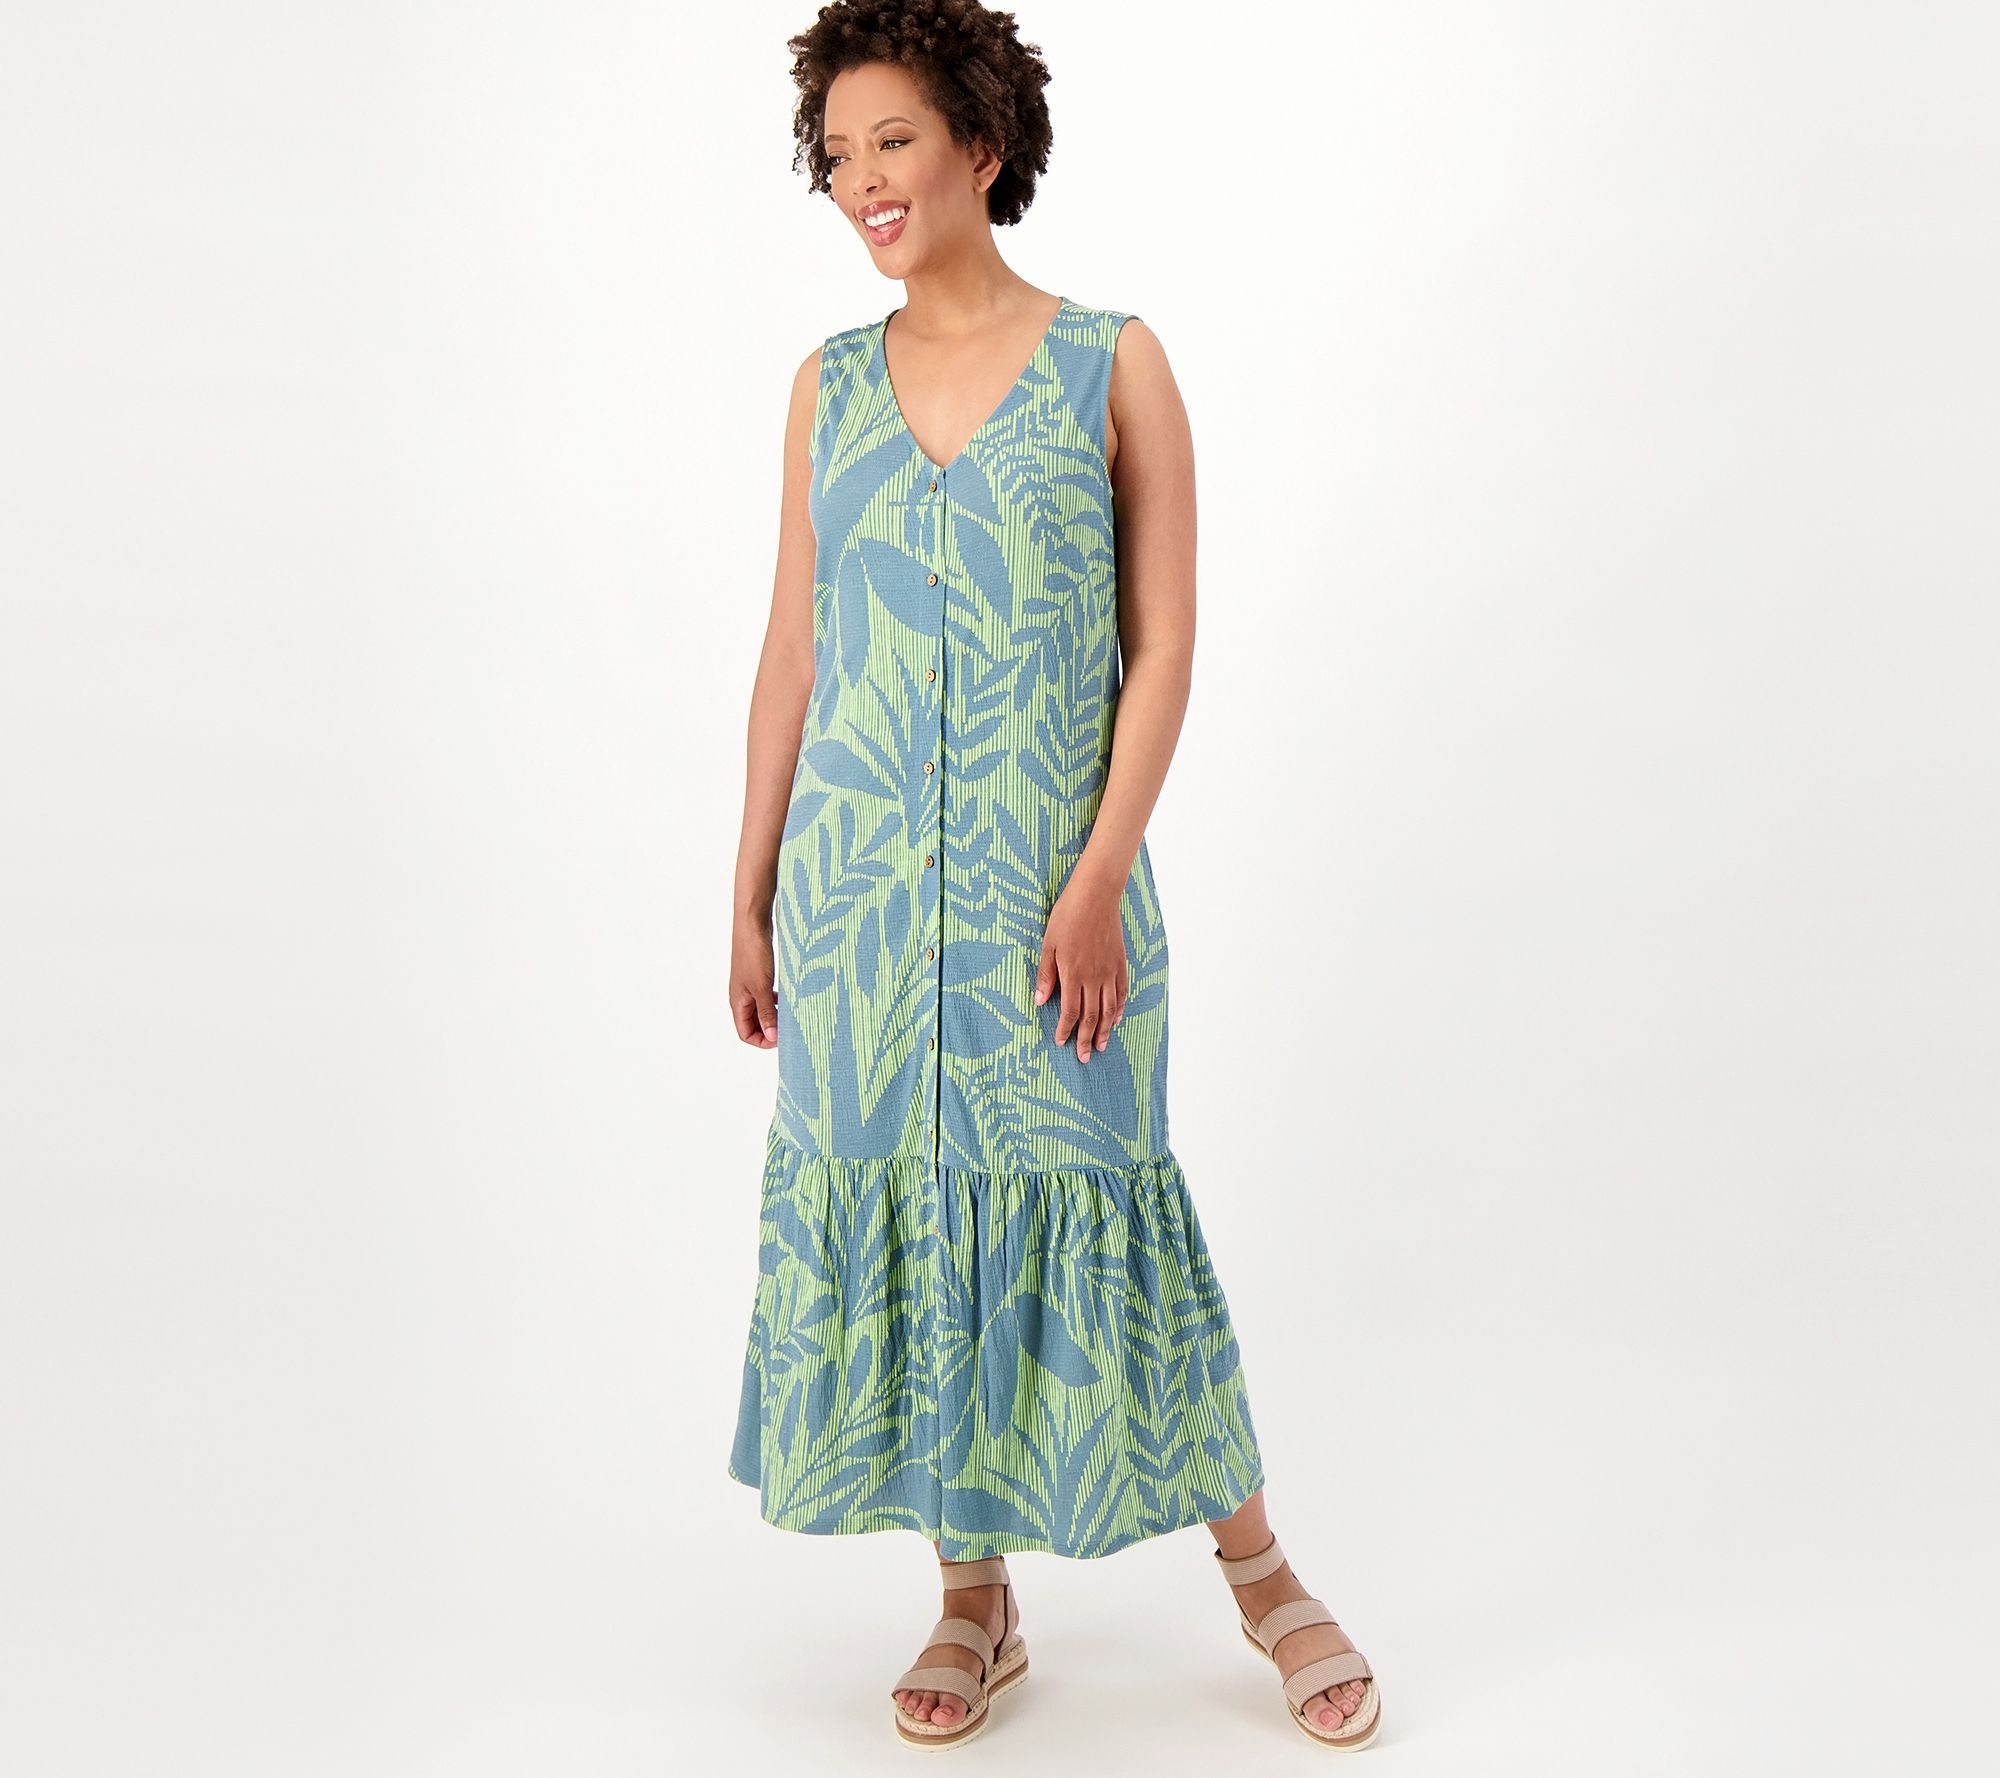 Le Fashion: Dress Like You're On Vacation in This Breezy Outfit